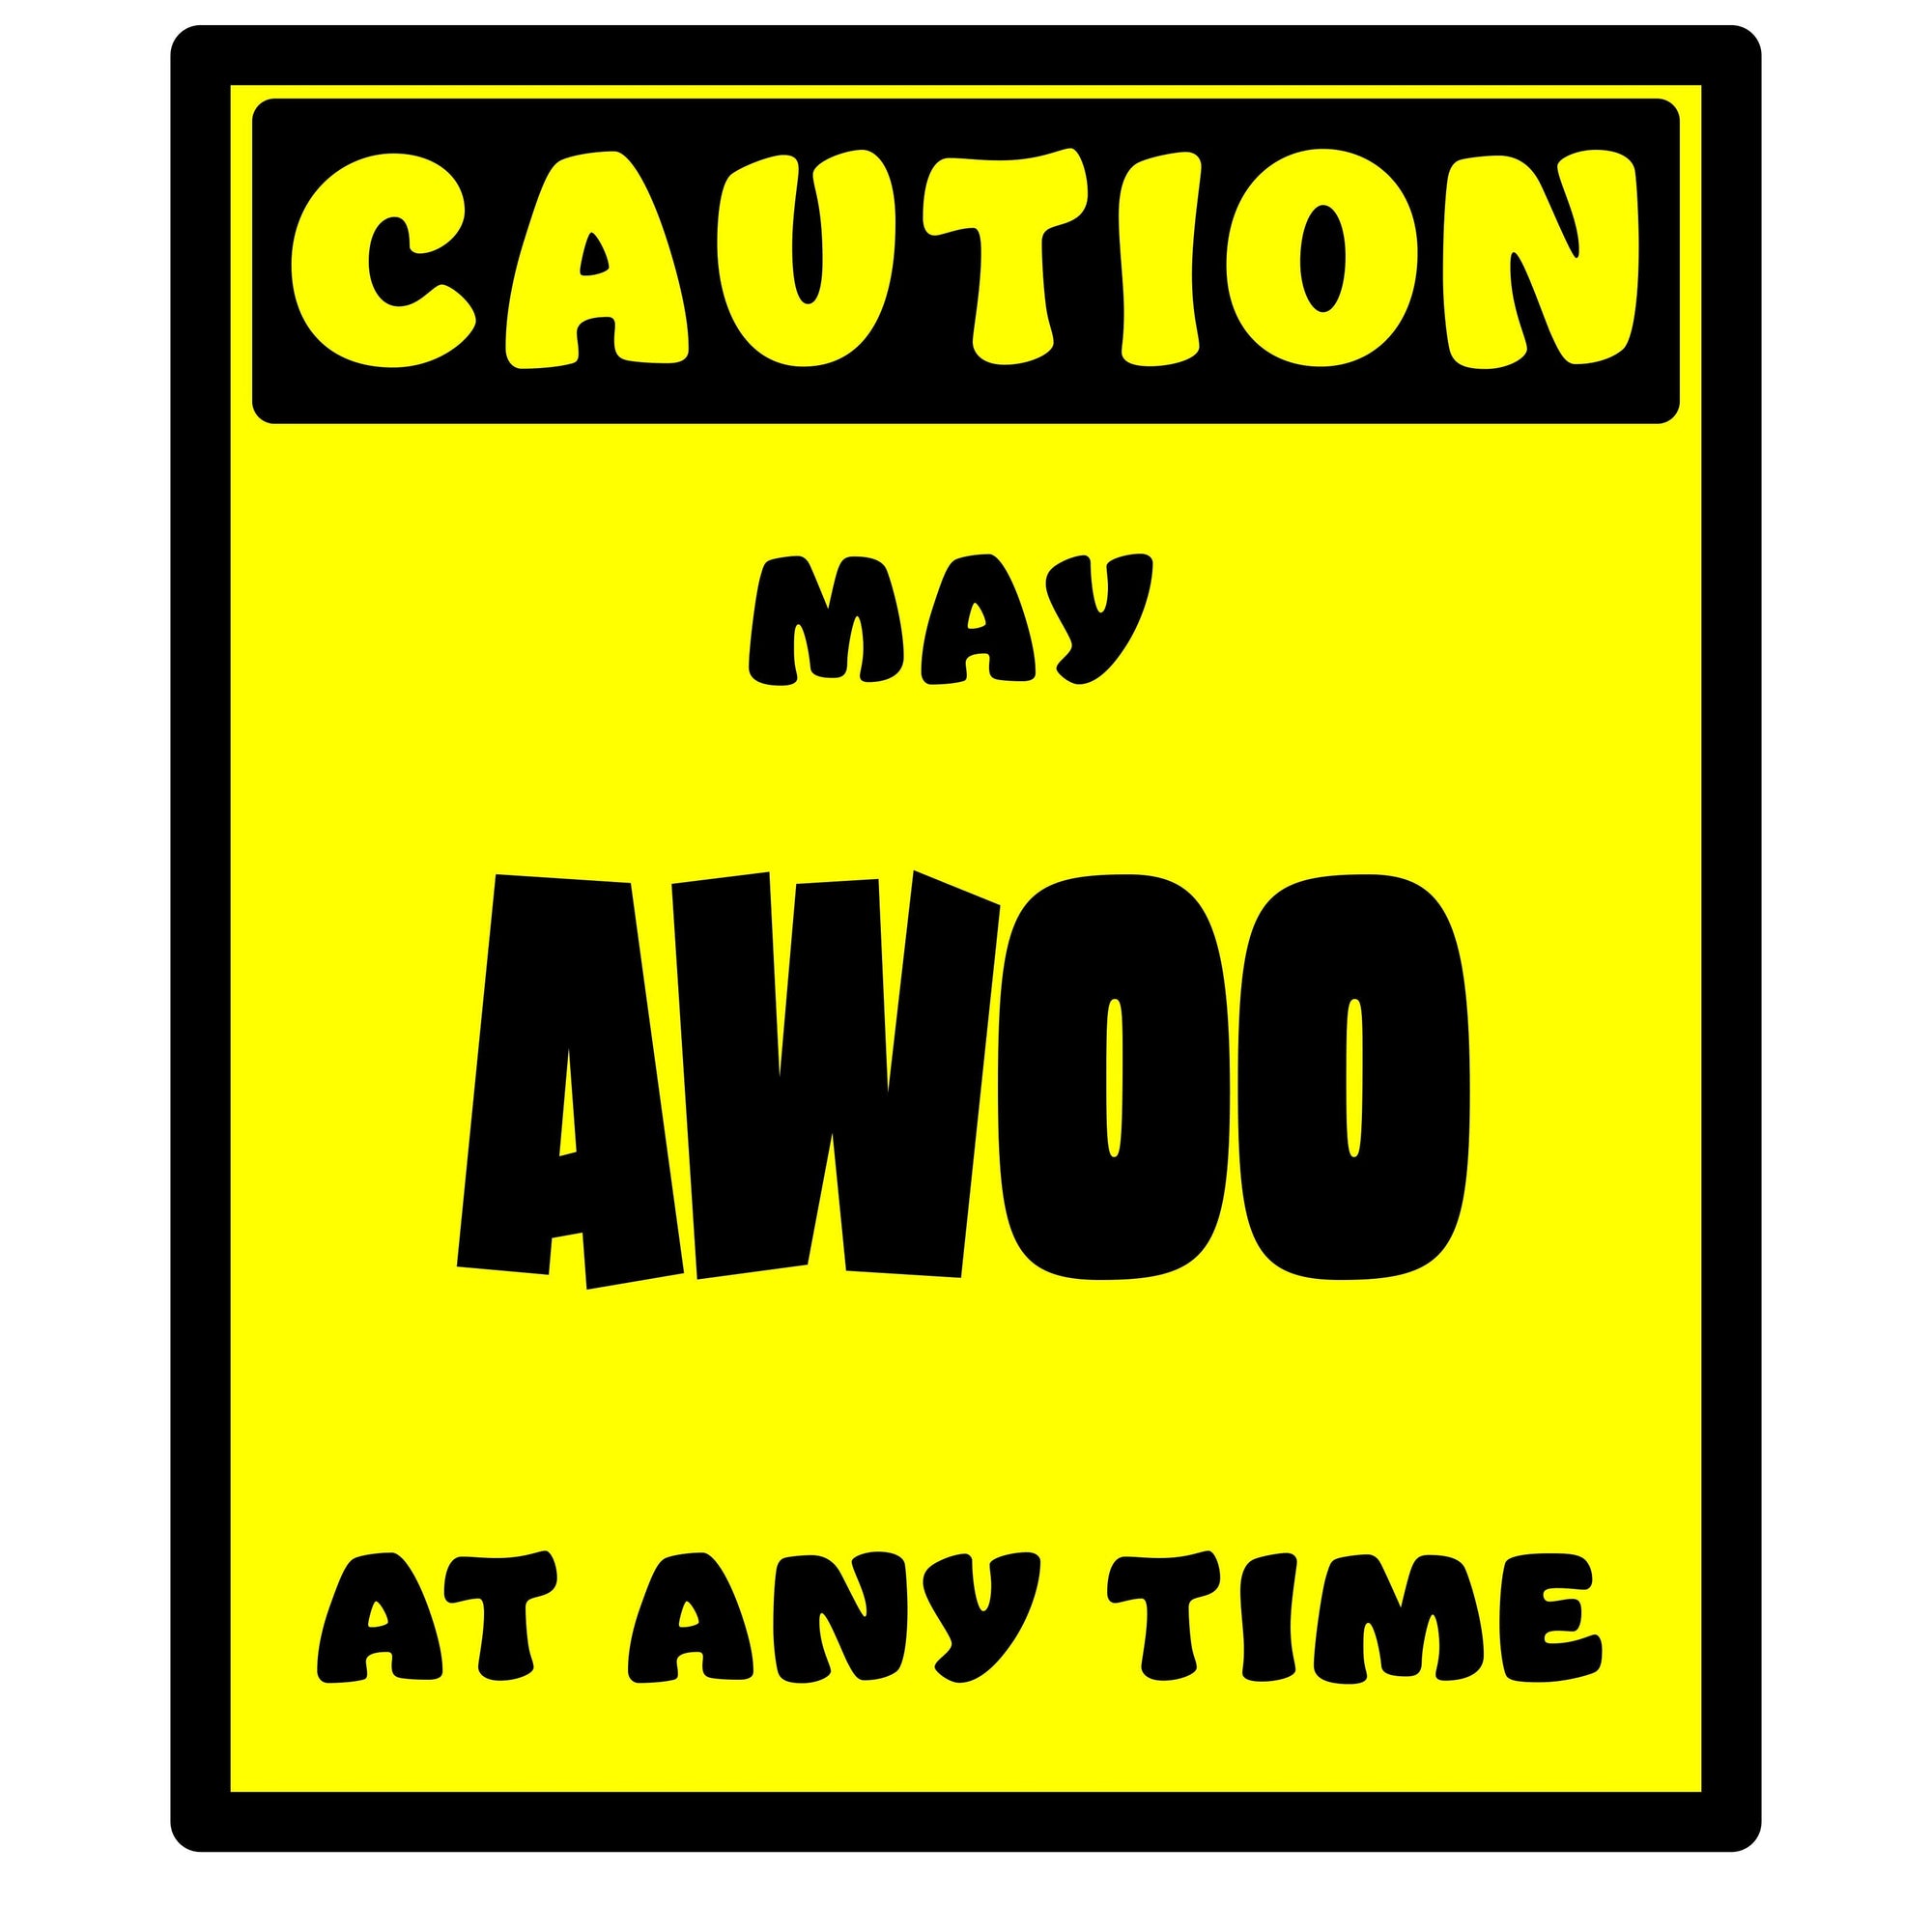 Whootorca - Caution! Series - CAUTION! May AWOO at any time!